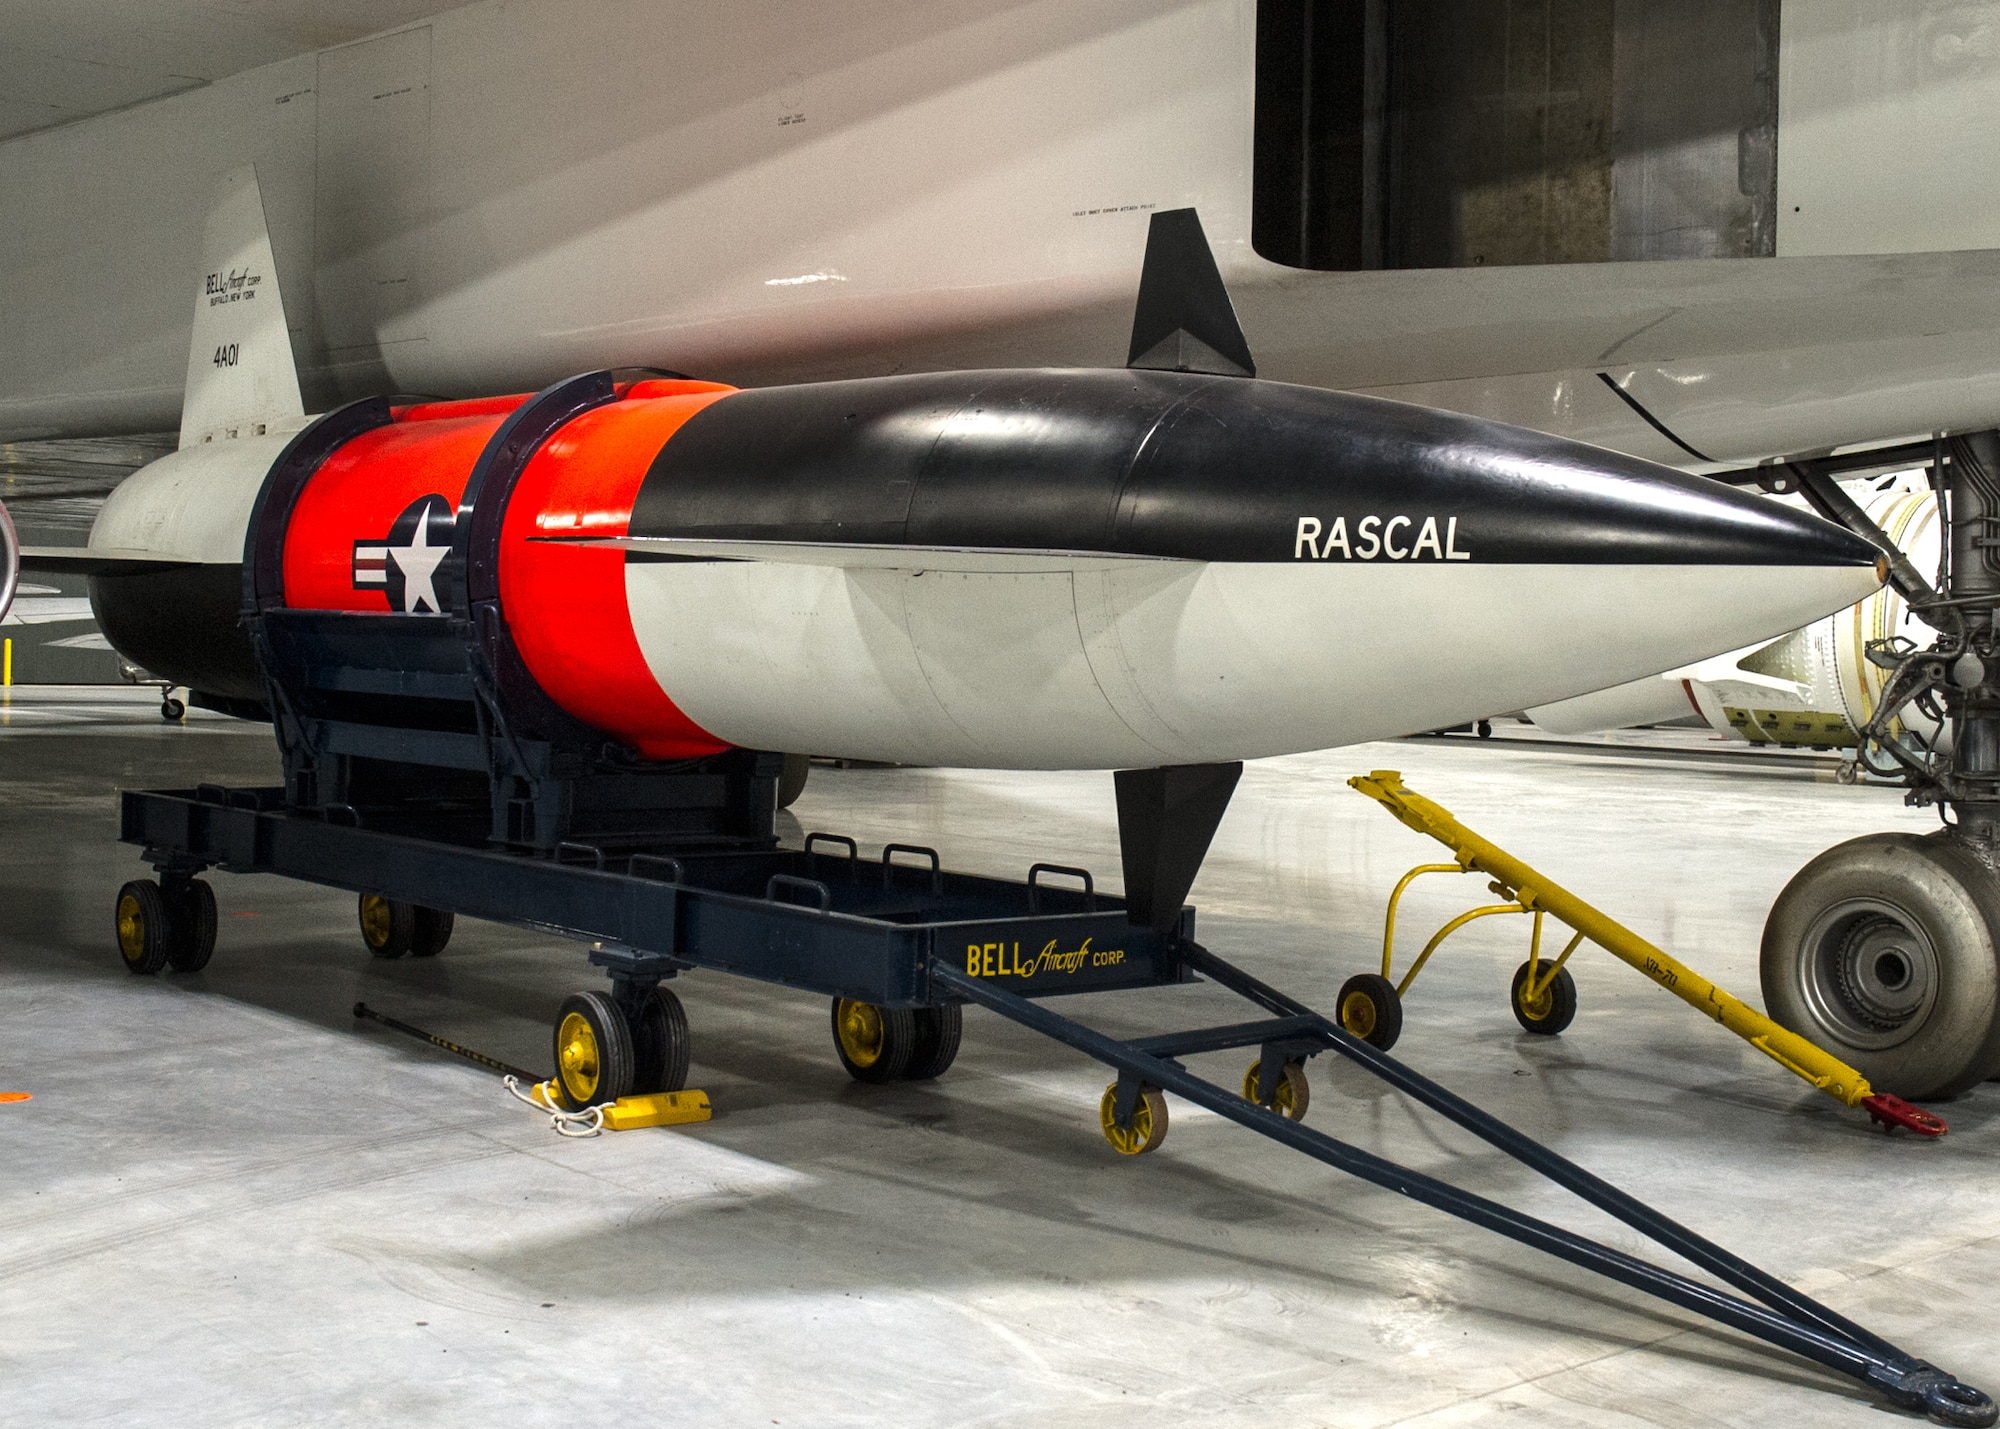 Bell XGAM-63 Rascal in the R&D Gallery at the National Museum of the U.S. Air Force on December 28, 2015. (U.S. Air Force photo)